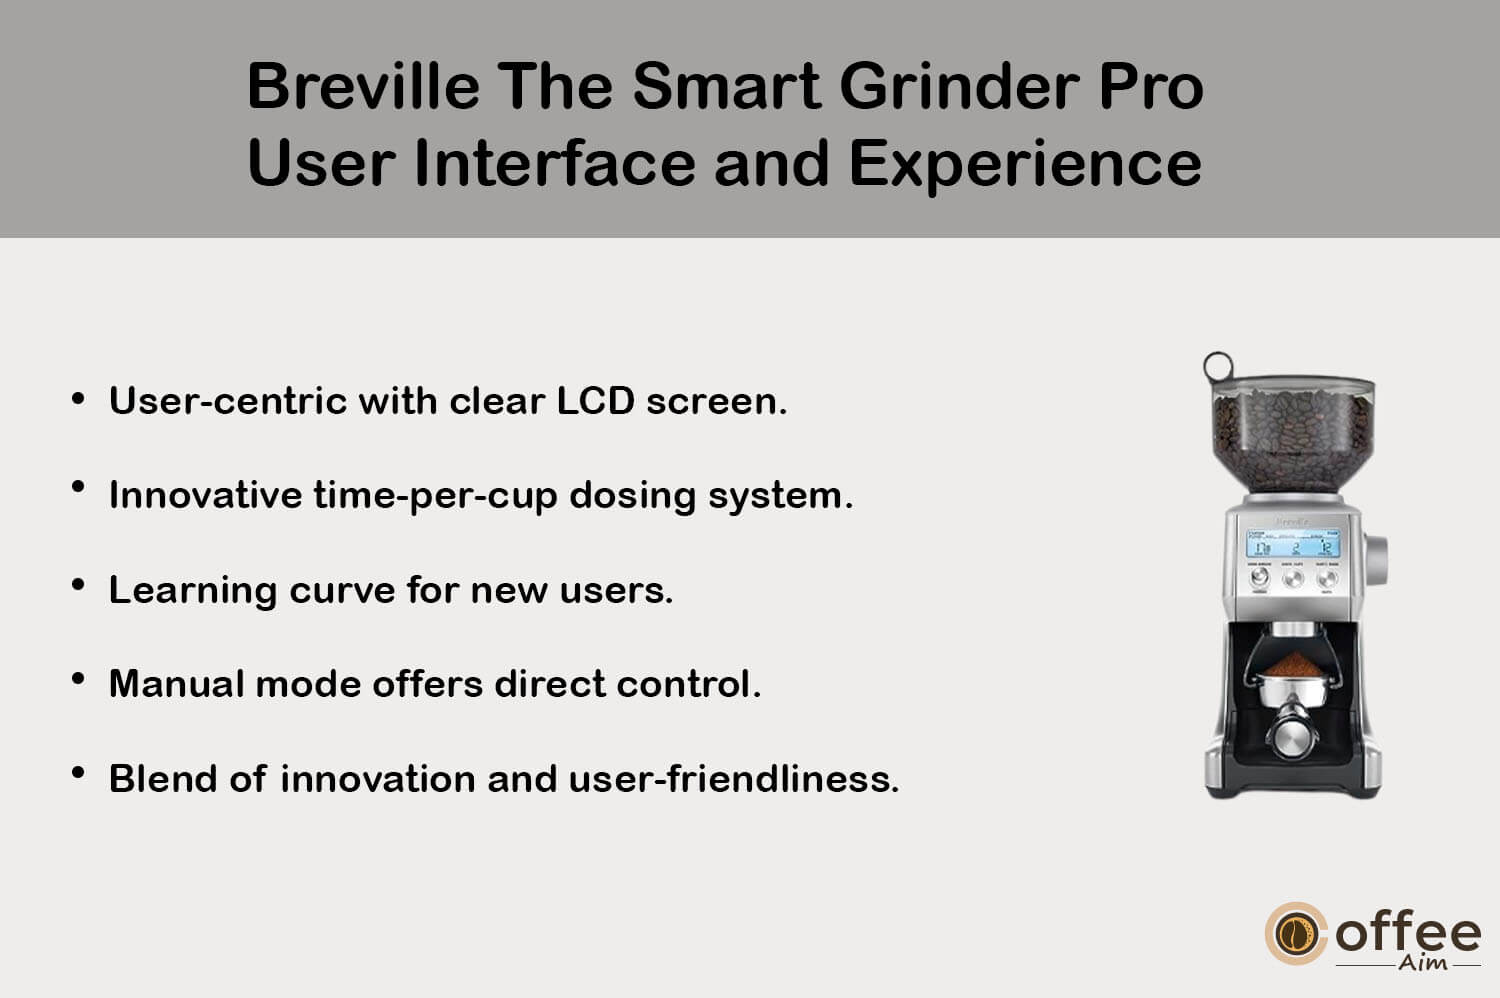 This image illustrates the intuitive user interface and seamless experience offered by the Breville Smart Grinder Pro BCG820BSSXL, as discussed in our comprehensive review of the product, titled "Breville The Smart Grinder Pro BCG820BSSXL Review." Explore the user-friendly design and interface that enhance your coffee grinding journey.